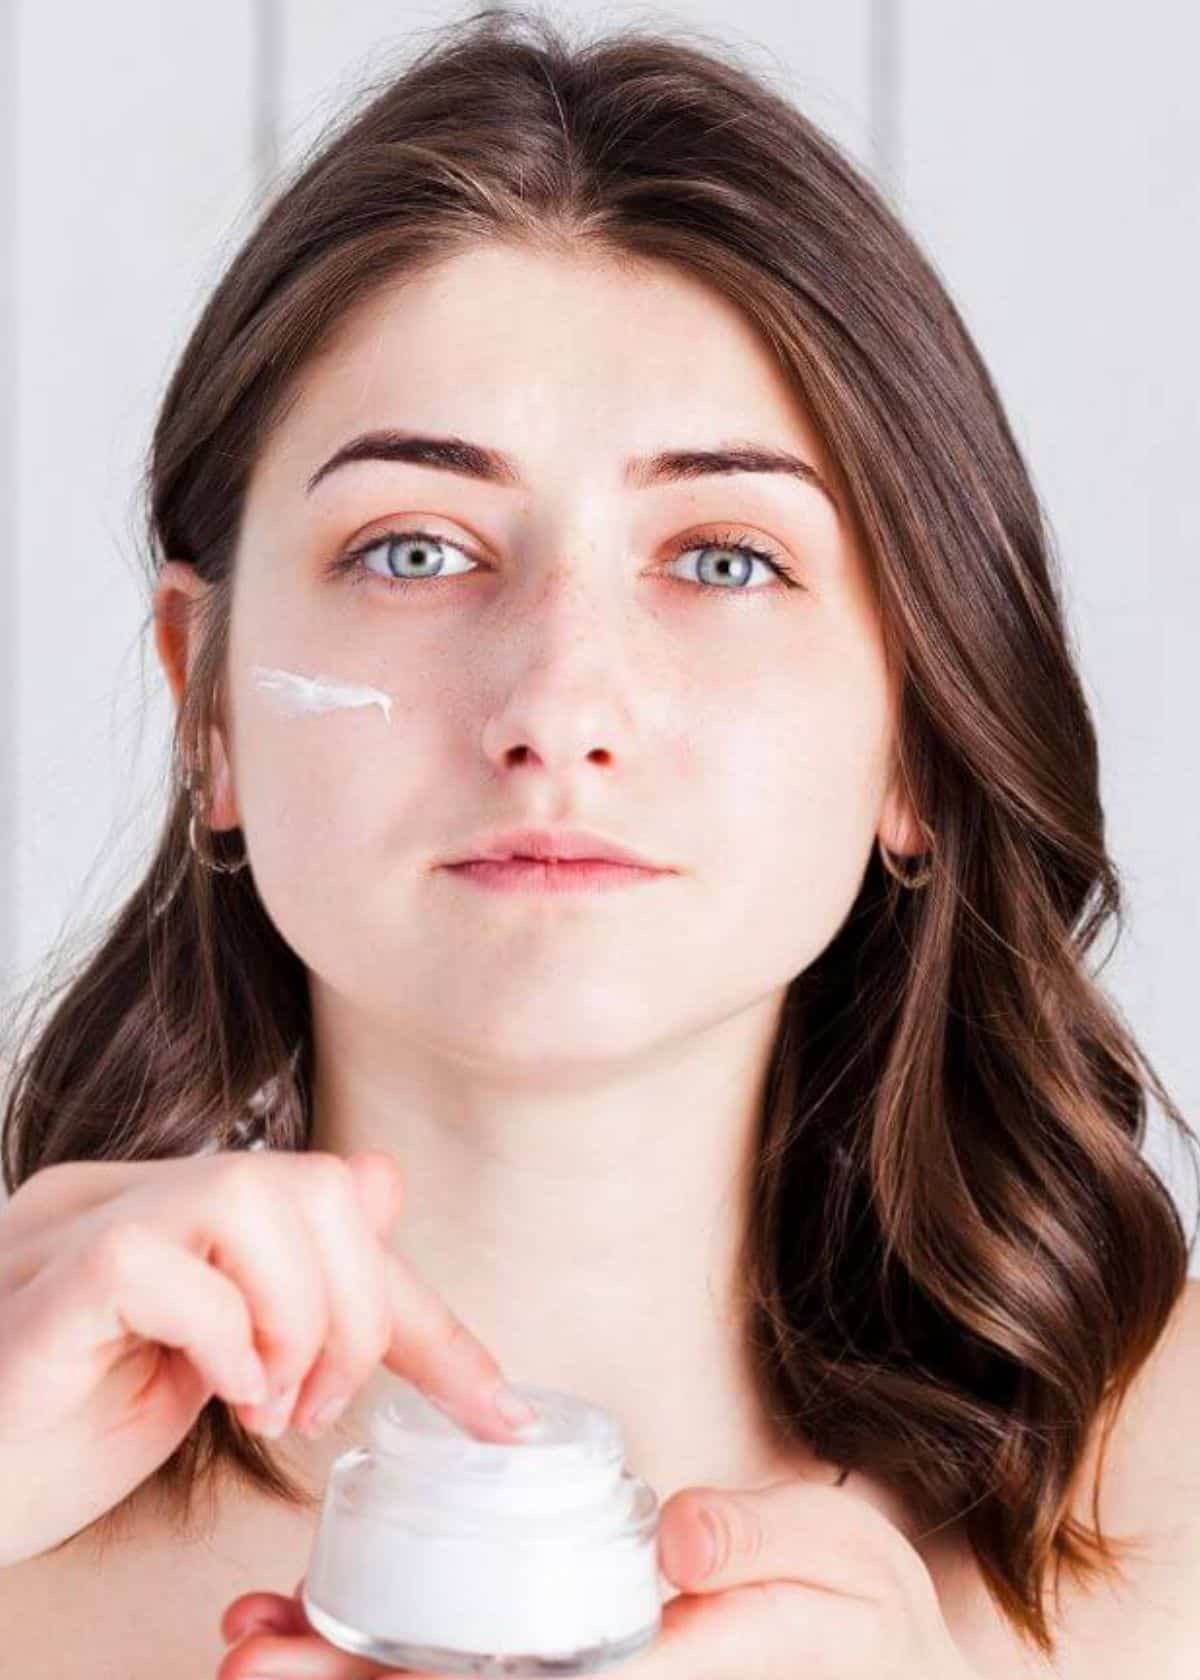 How to Naturally Moisturize Face without Clogging Pores?